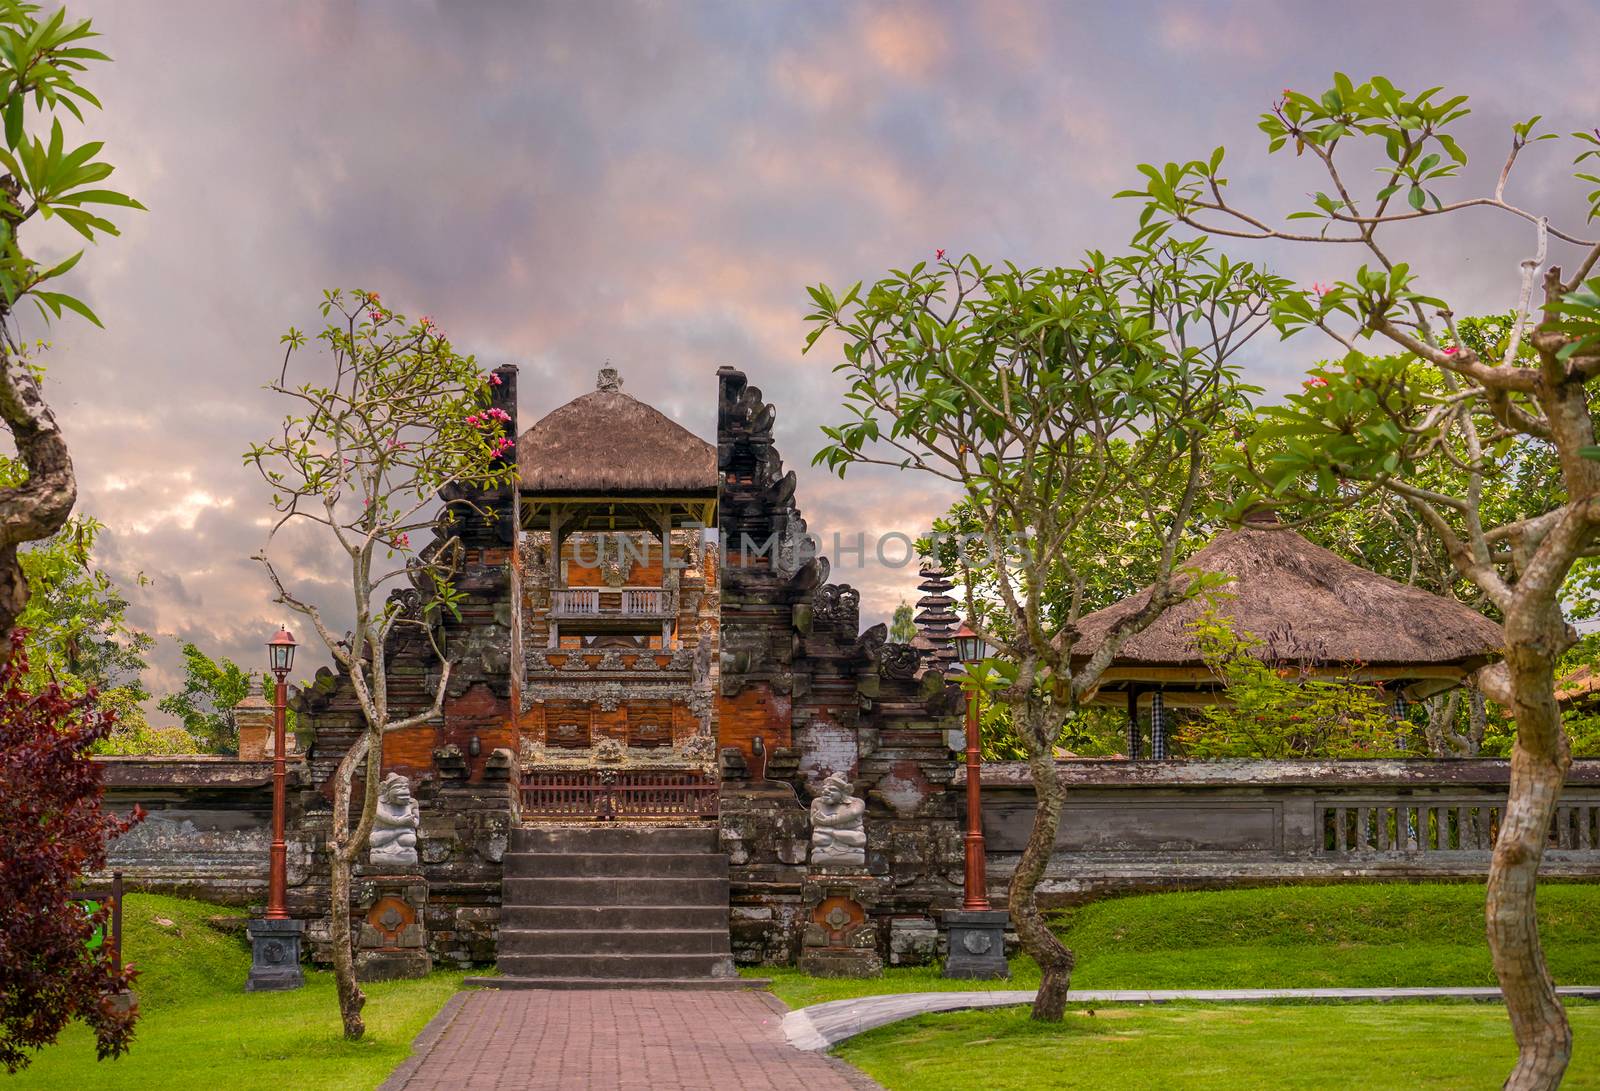 royal temple of Mengwi Empire located in Mengwi, Badung regency that is famous places of interest in Bali.